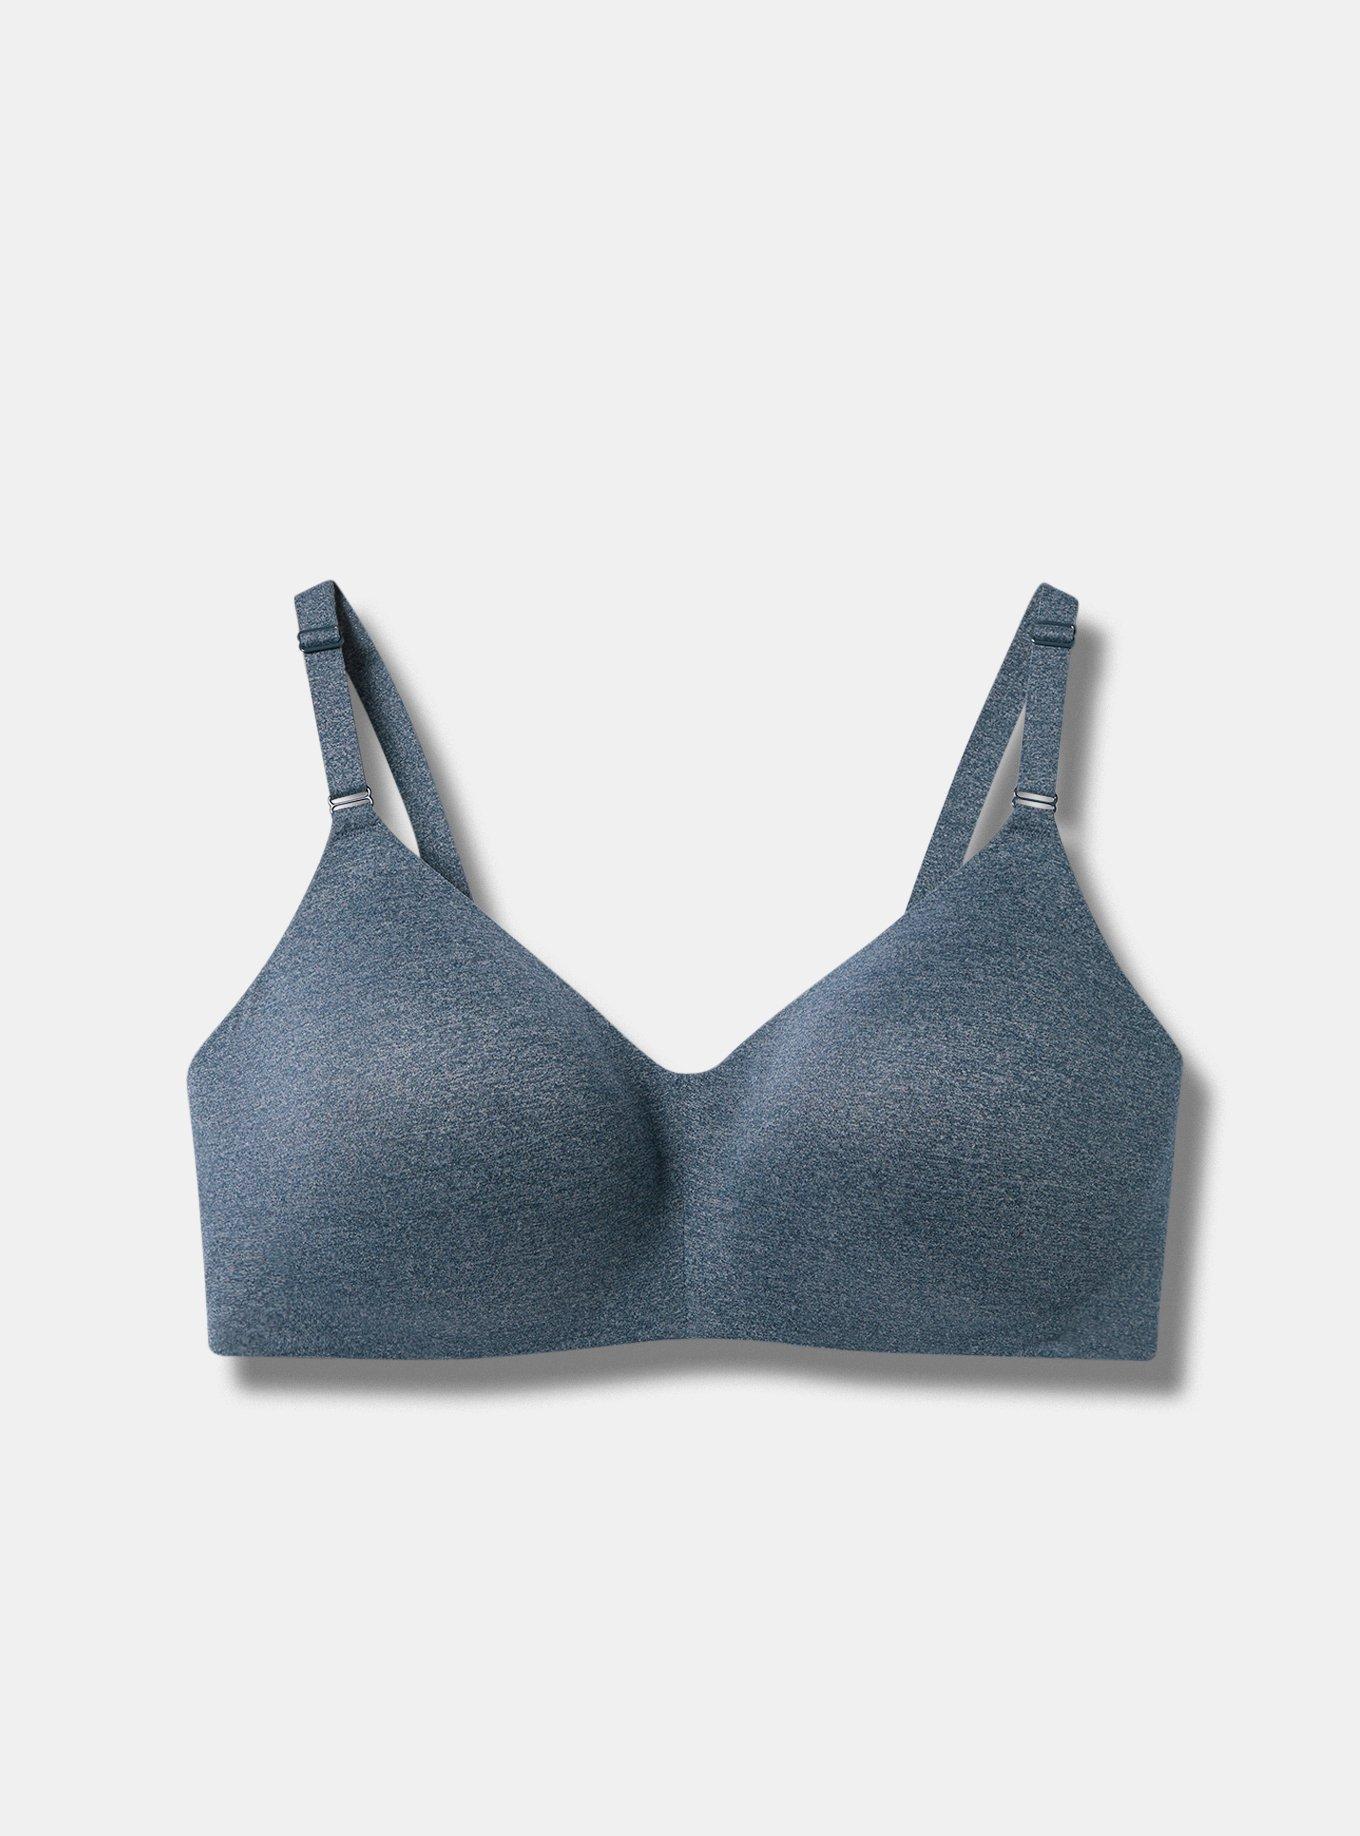 Outfitting Solution Bras 38D